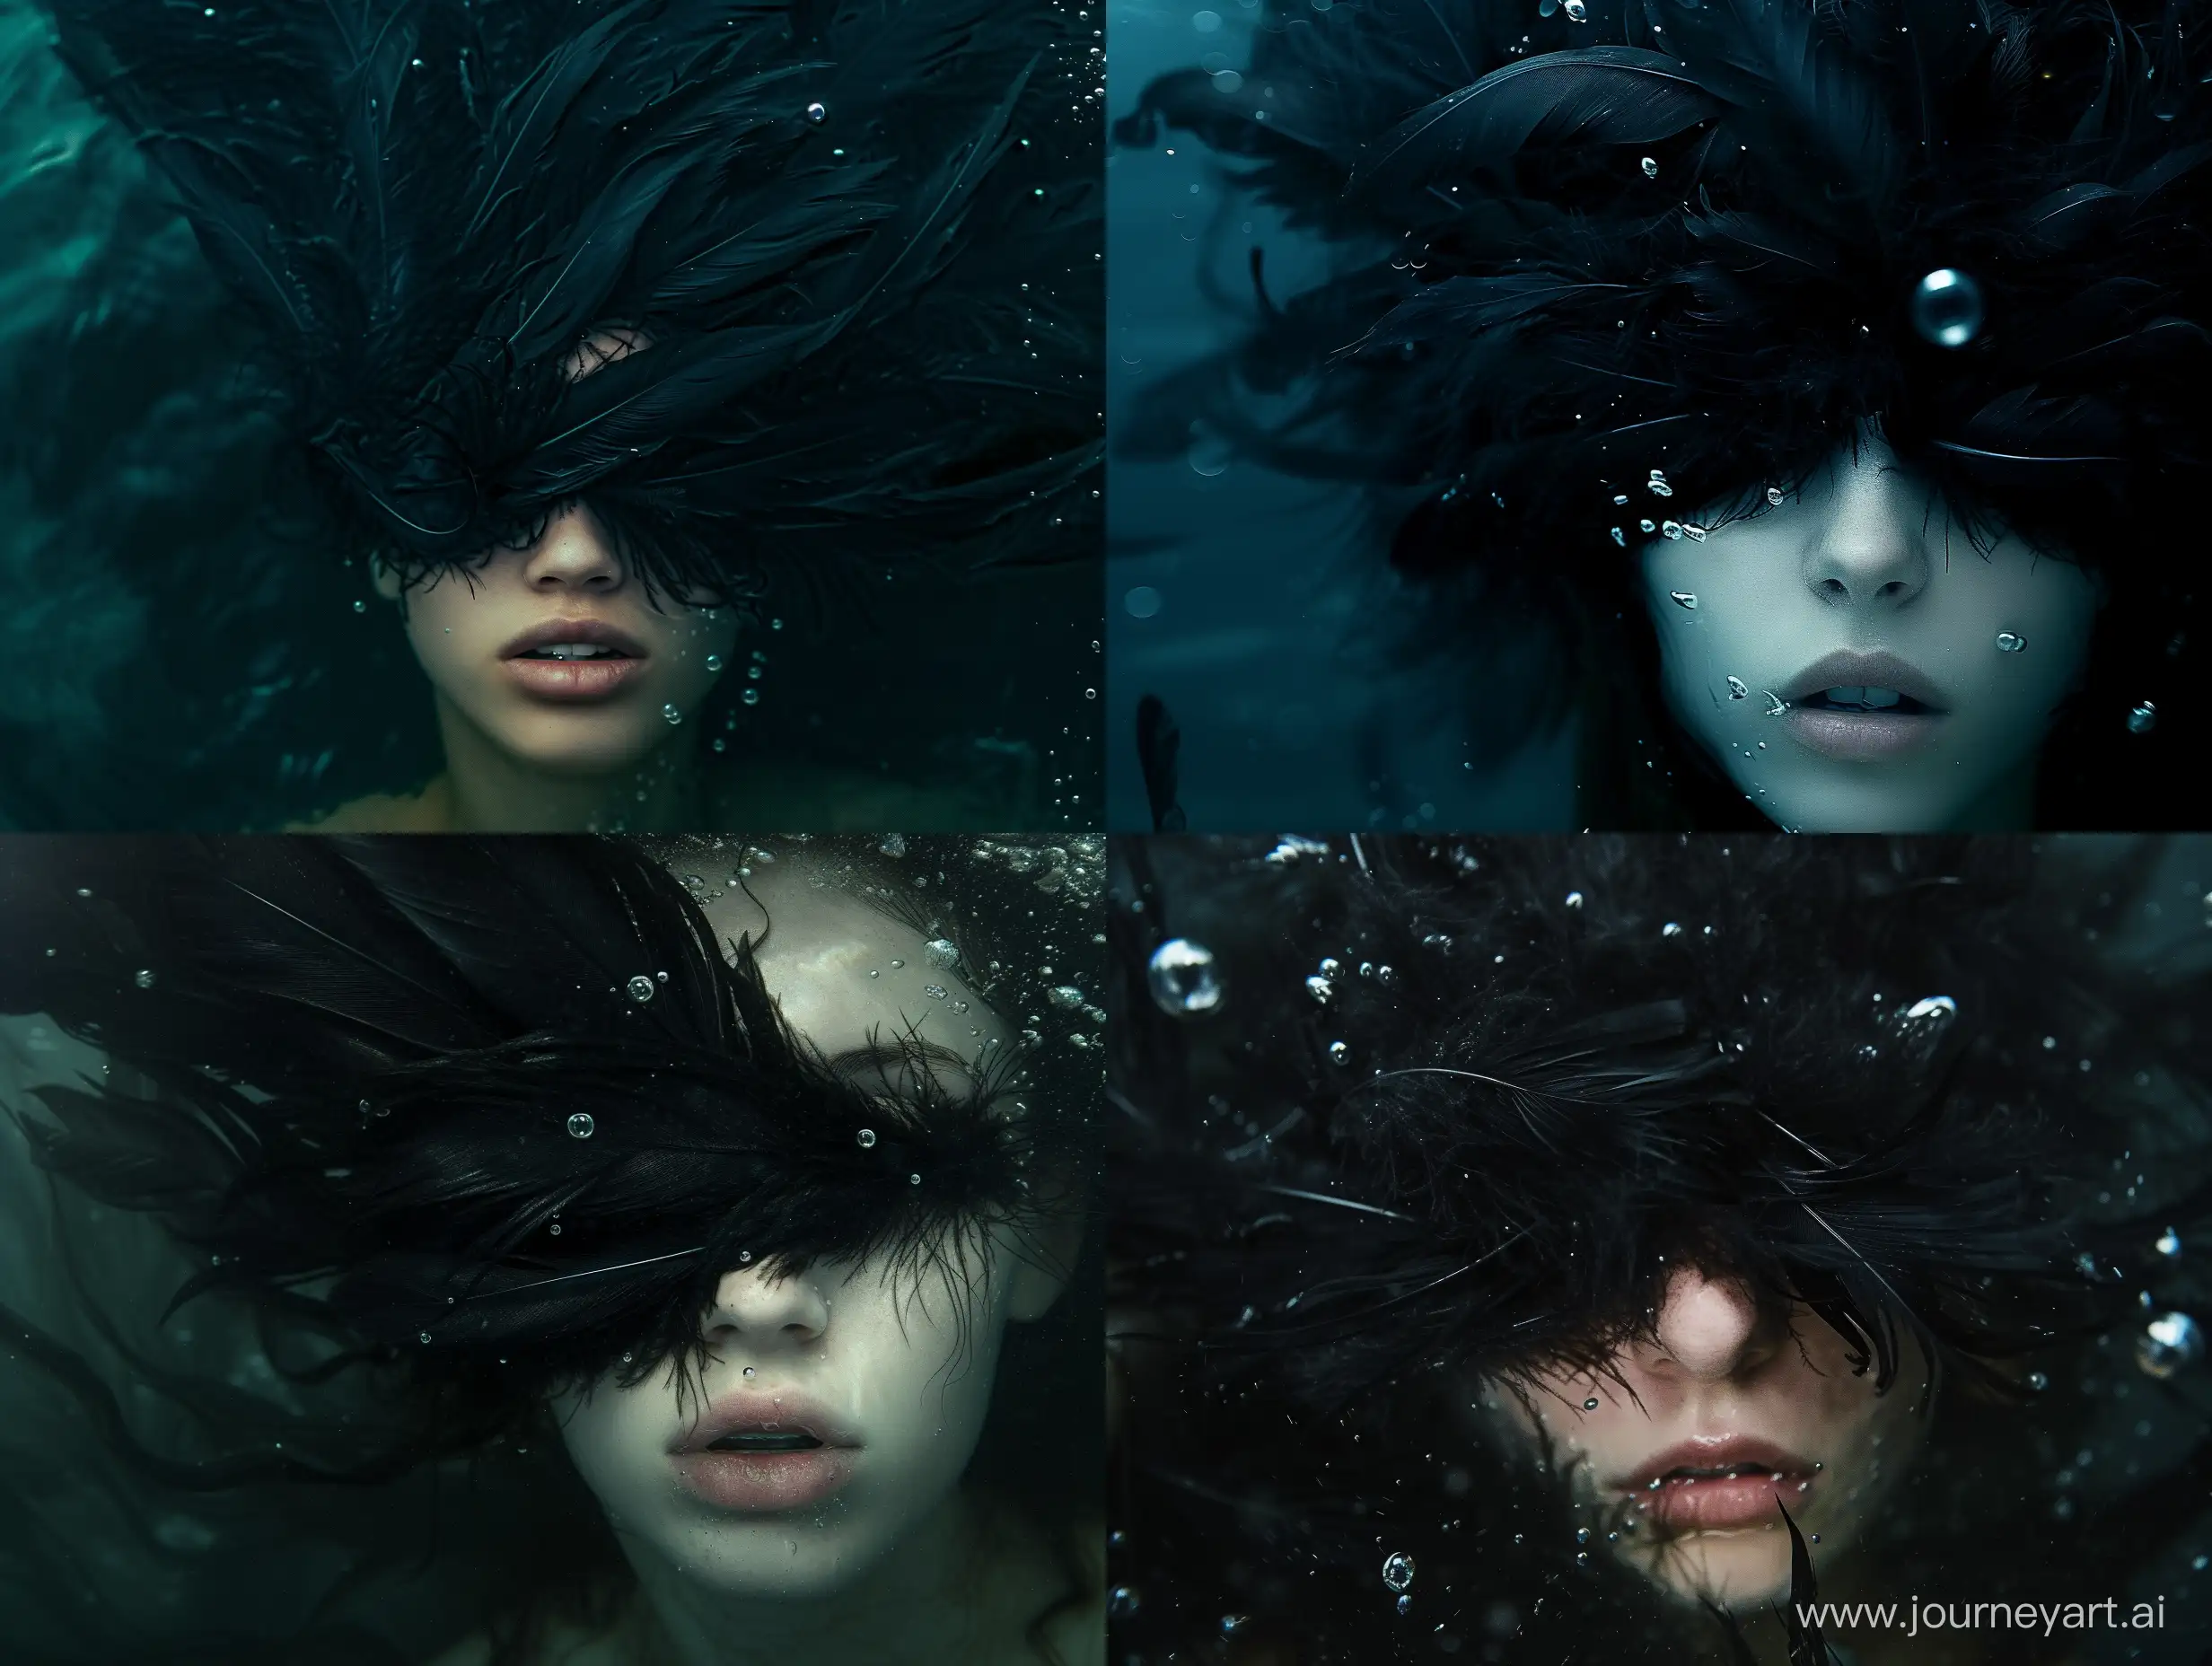 Mystical-Underwater-Enchantment-Girl-Submerged-in-Darkness-and-Feathers